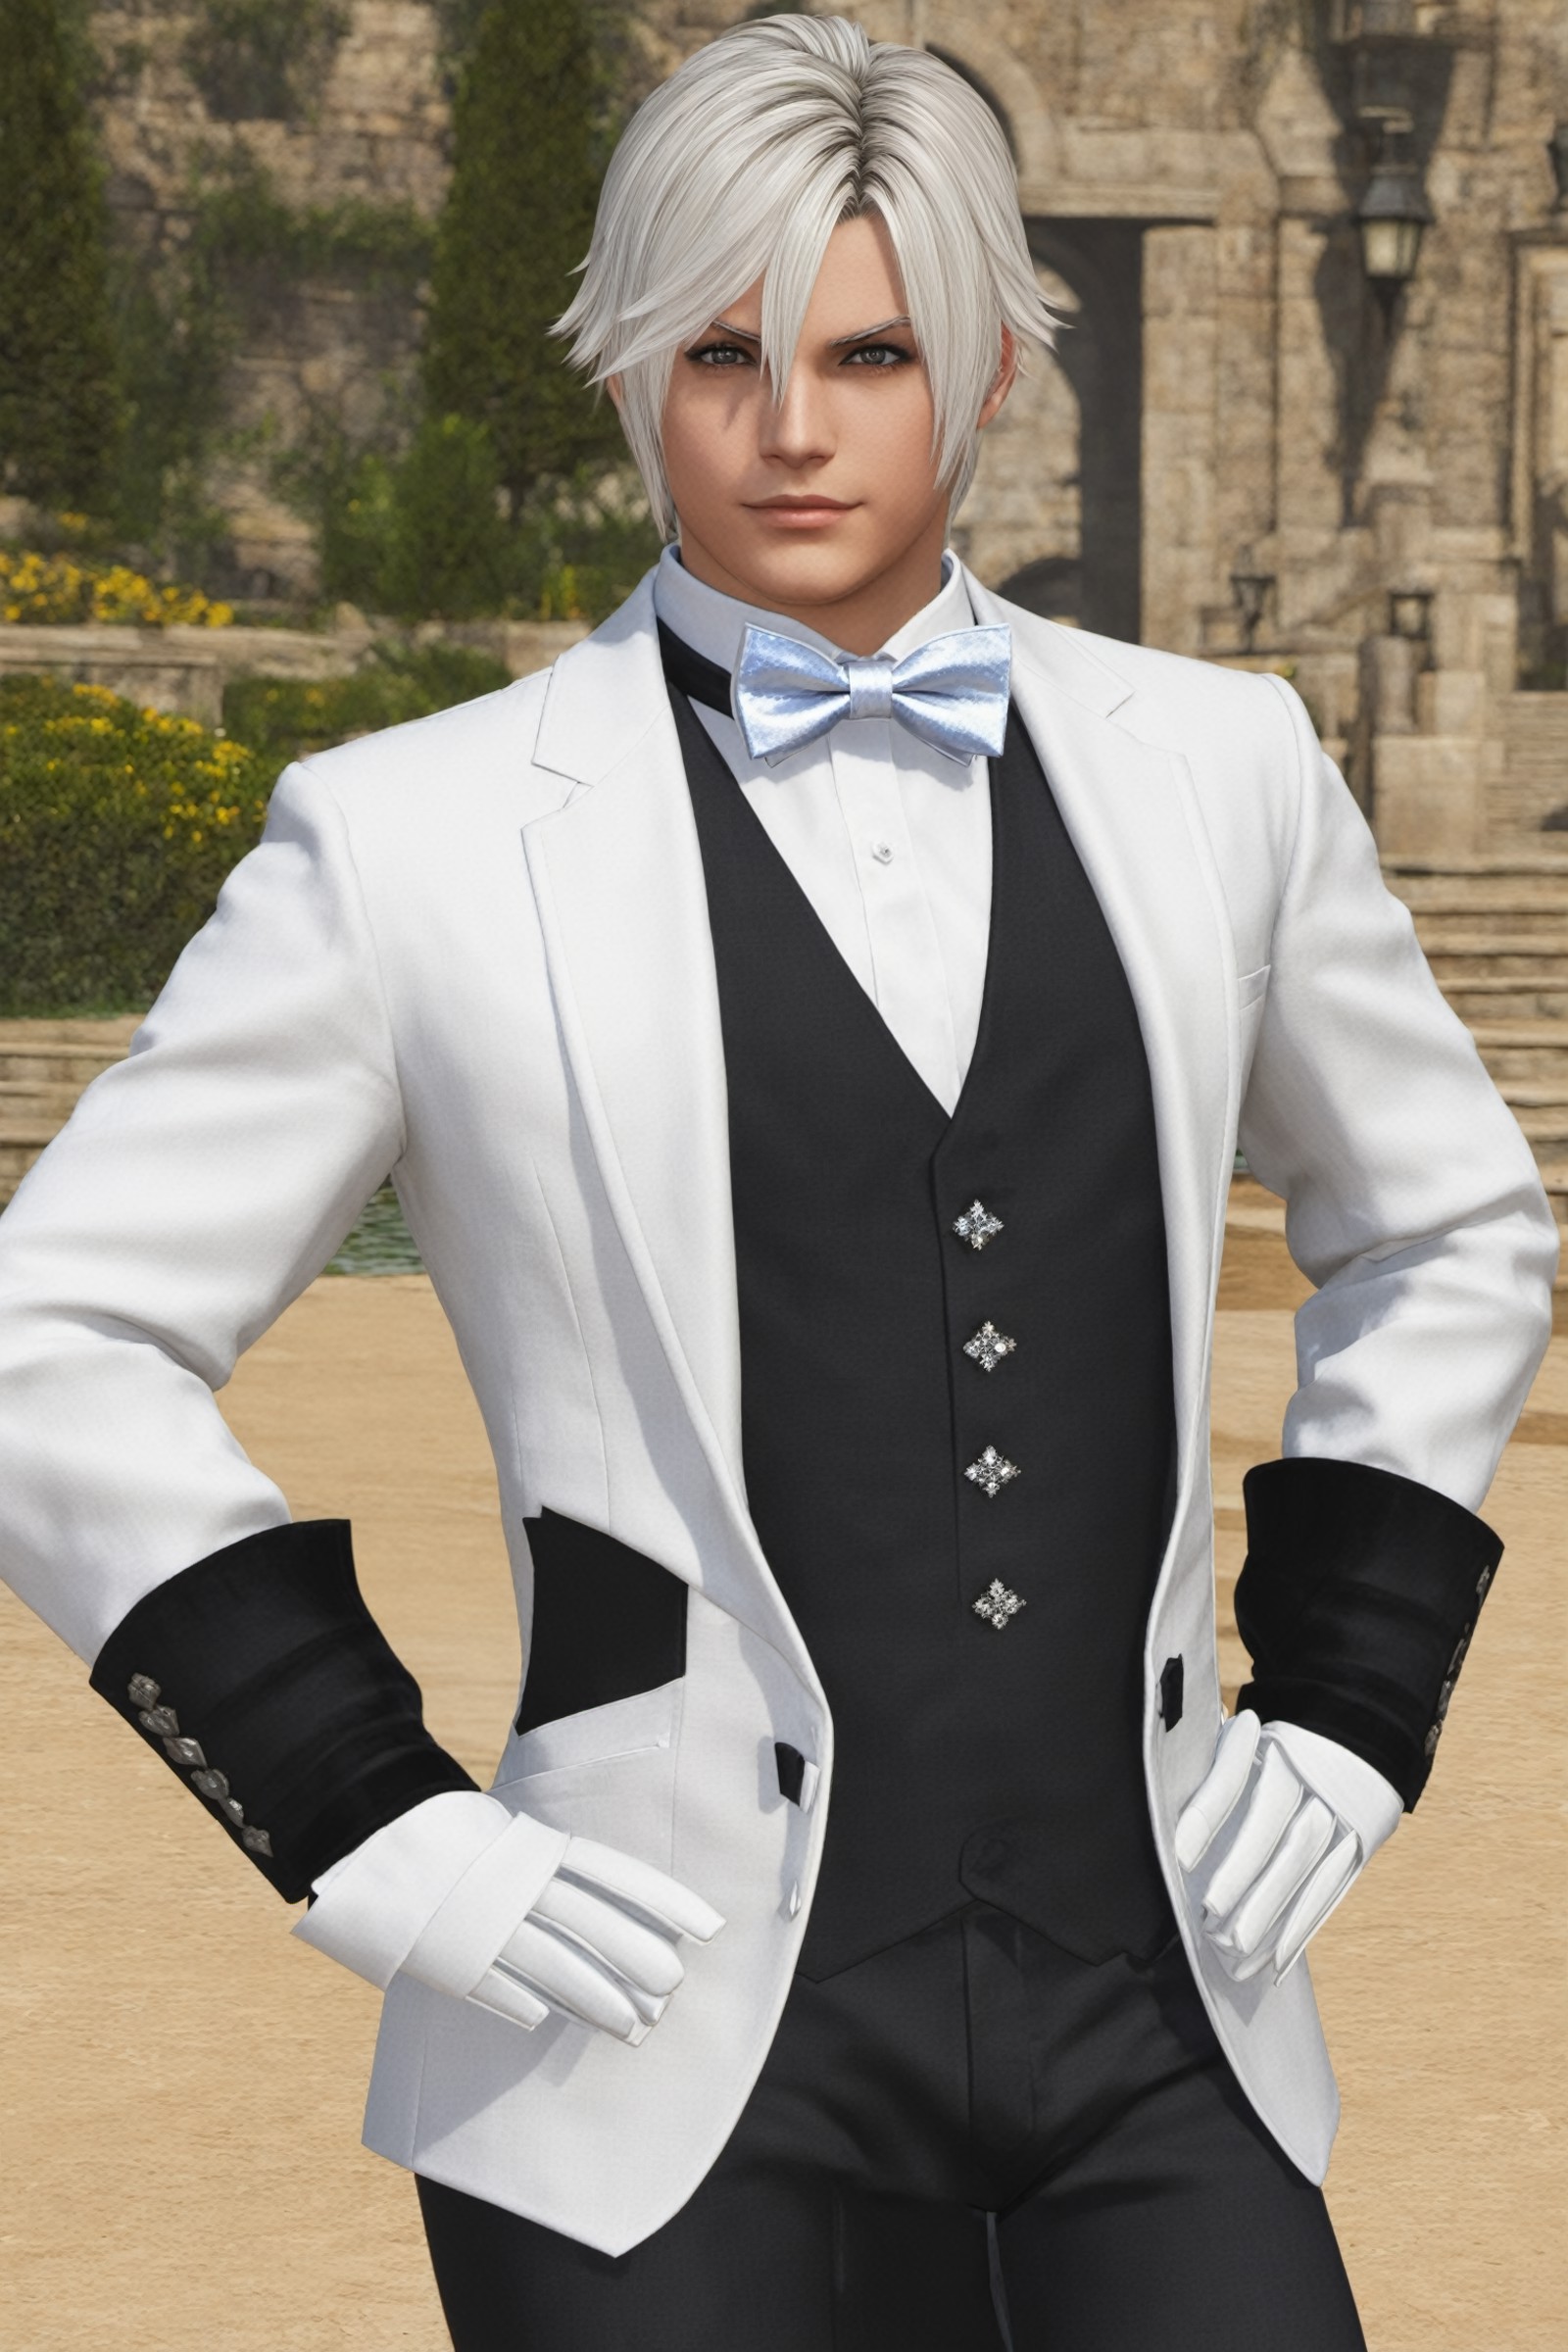 Thancred Waters,  Hyur,  looking at viewer,  gloves,  bow,  upper body,  white gloves,  bowtie,  hand on hip,  formal,  sp...